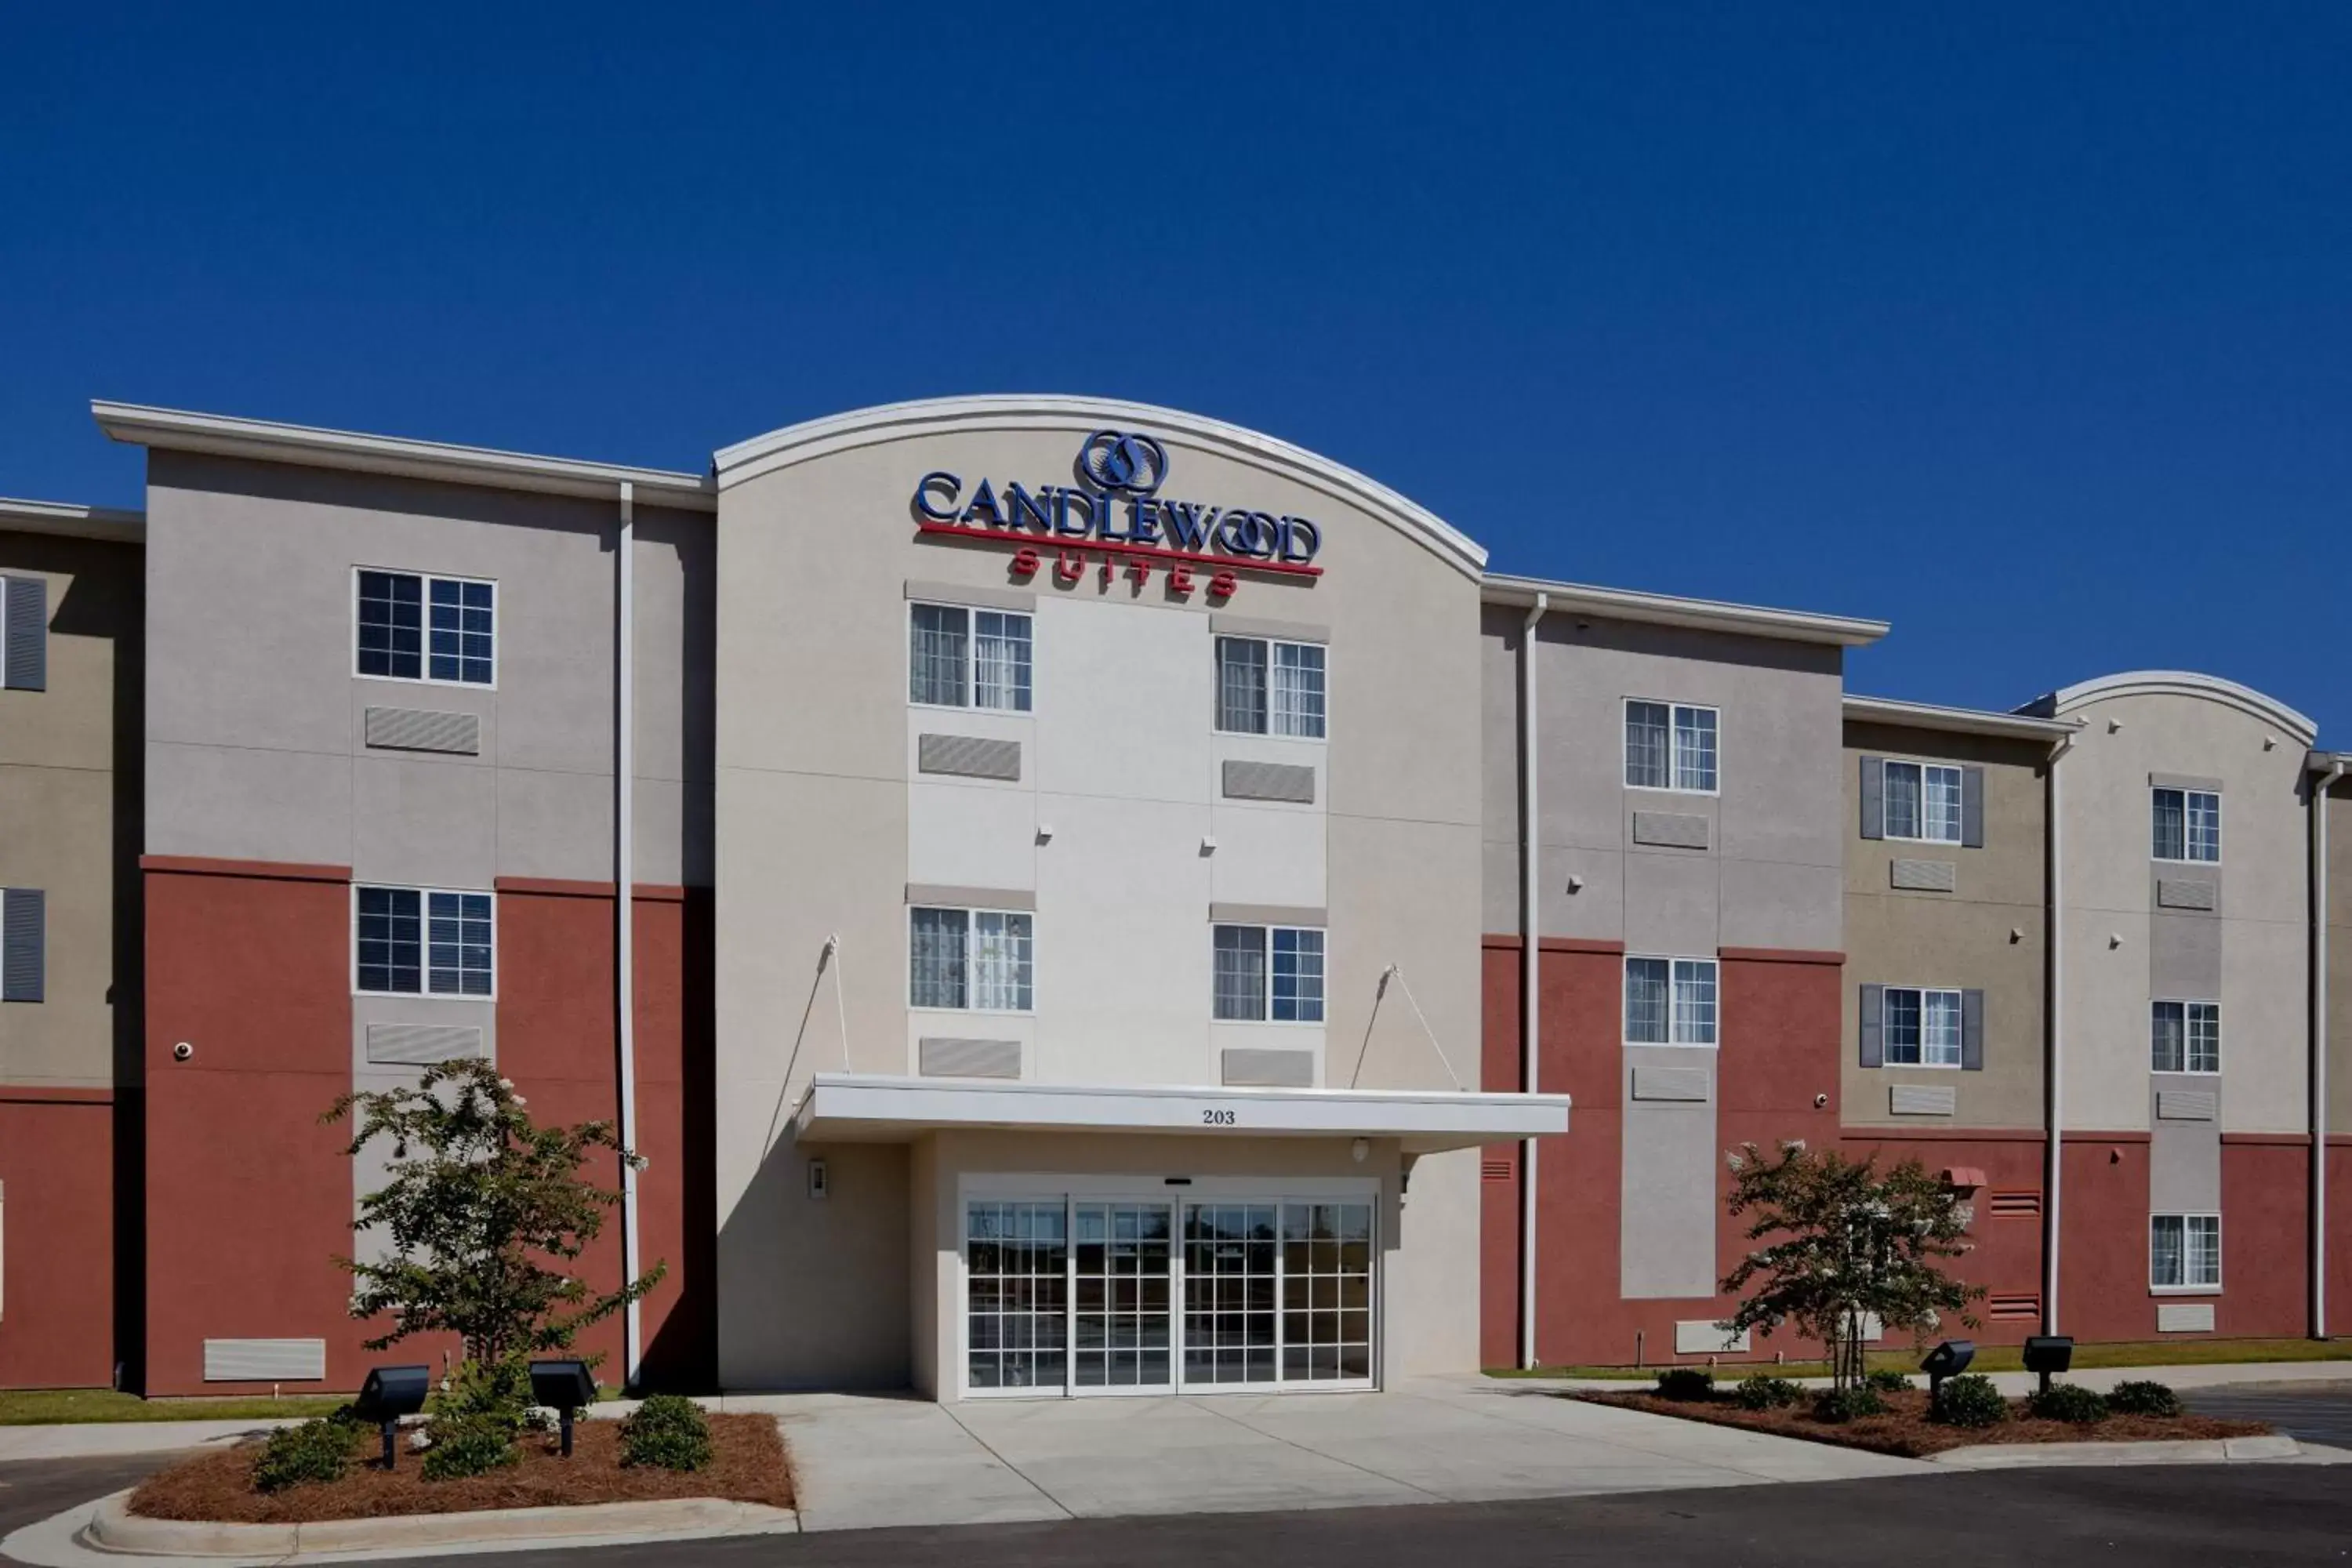 Property building in Candlewood Suites Enterprise, an IHG Hotel